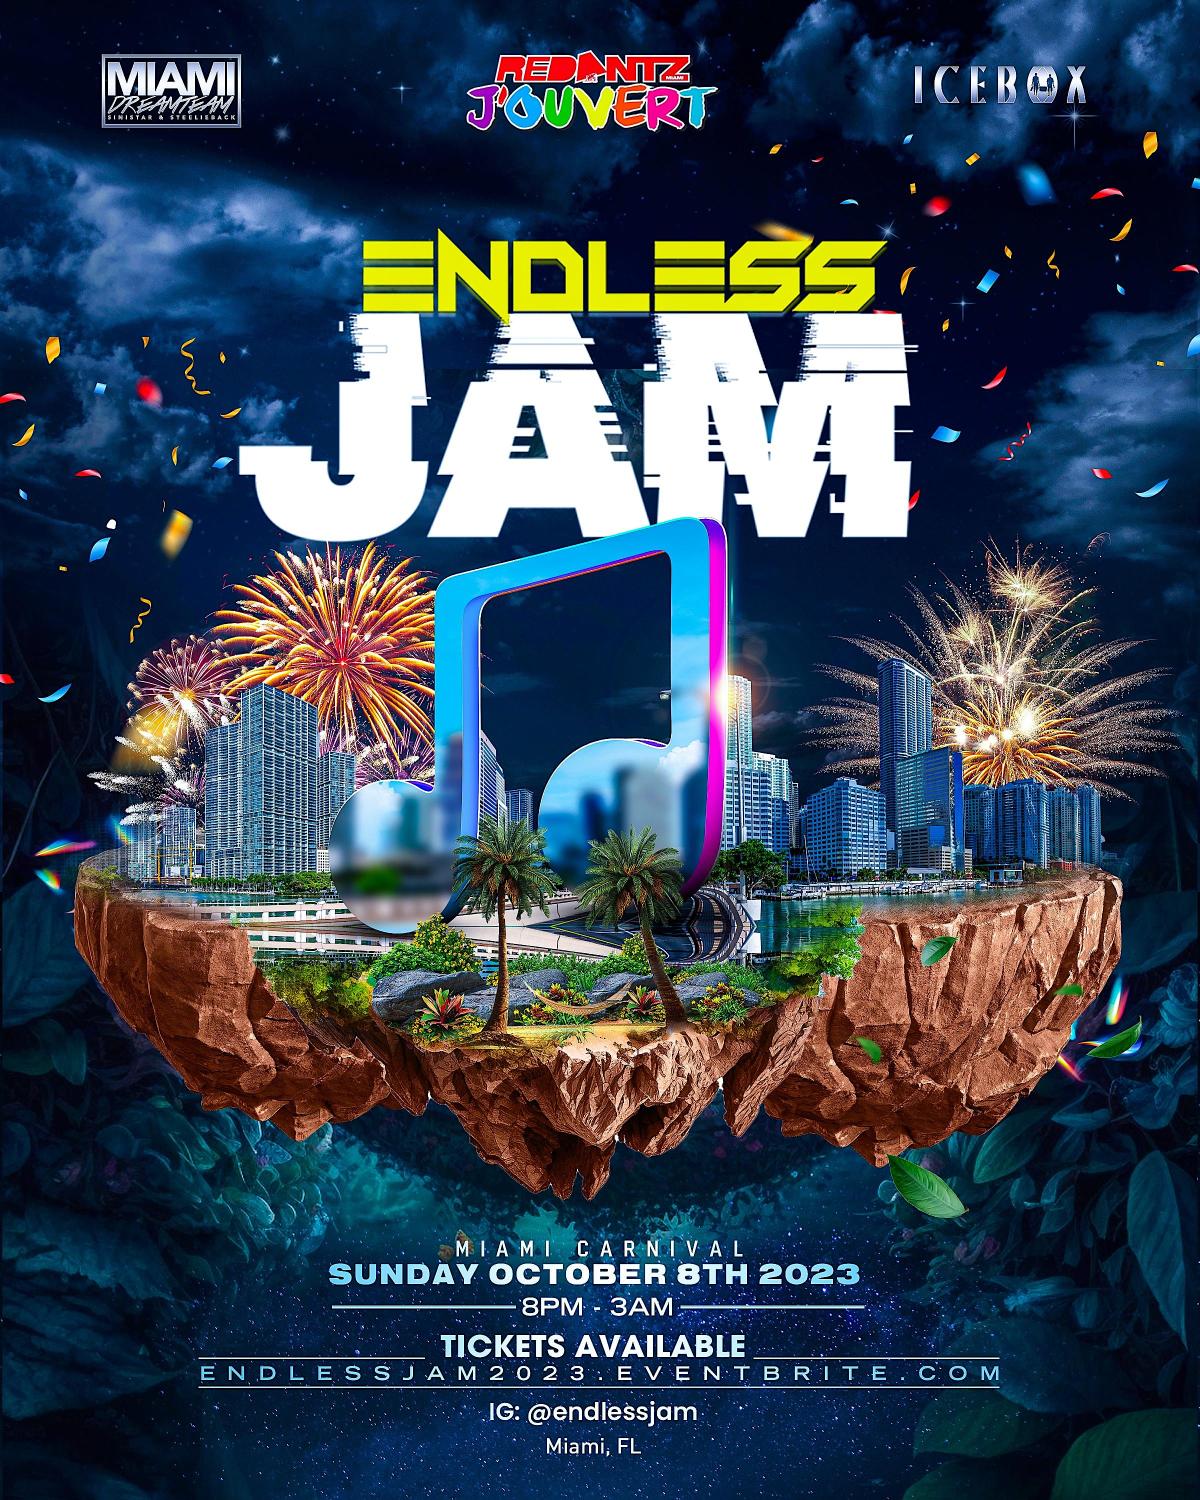 Endless Jam flyer or graphic.